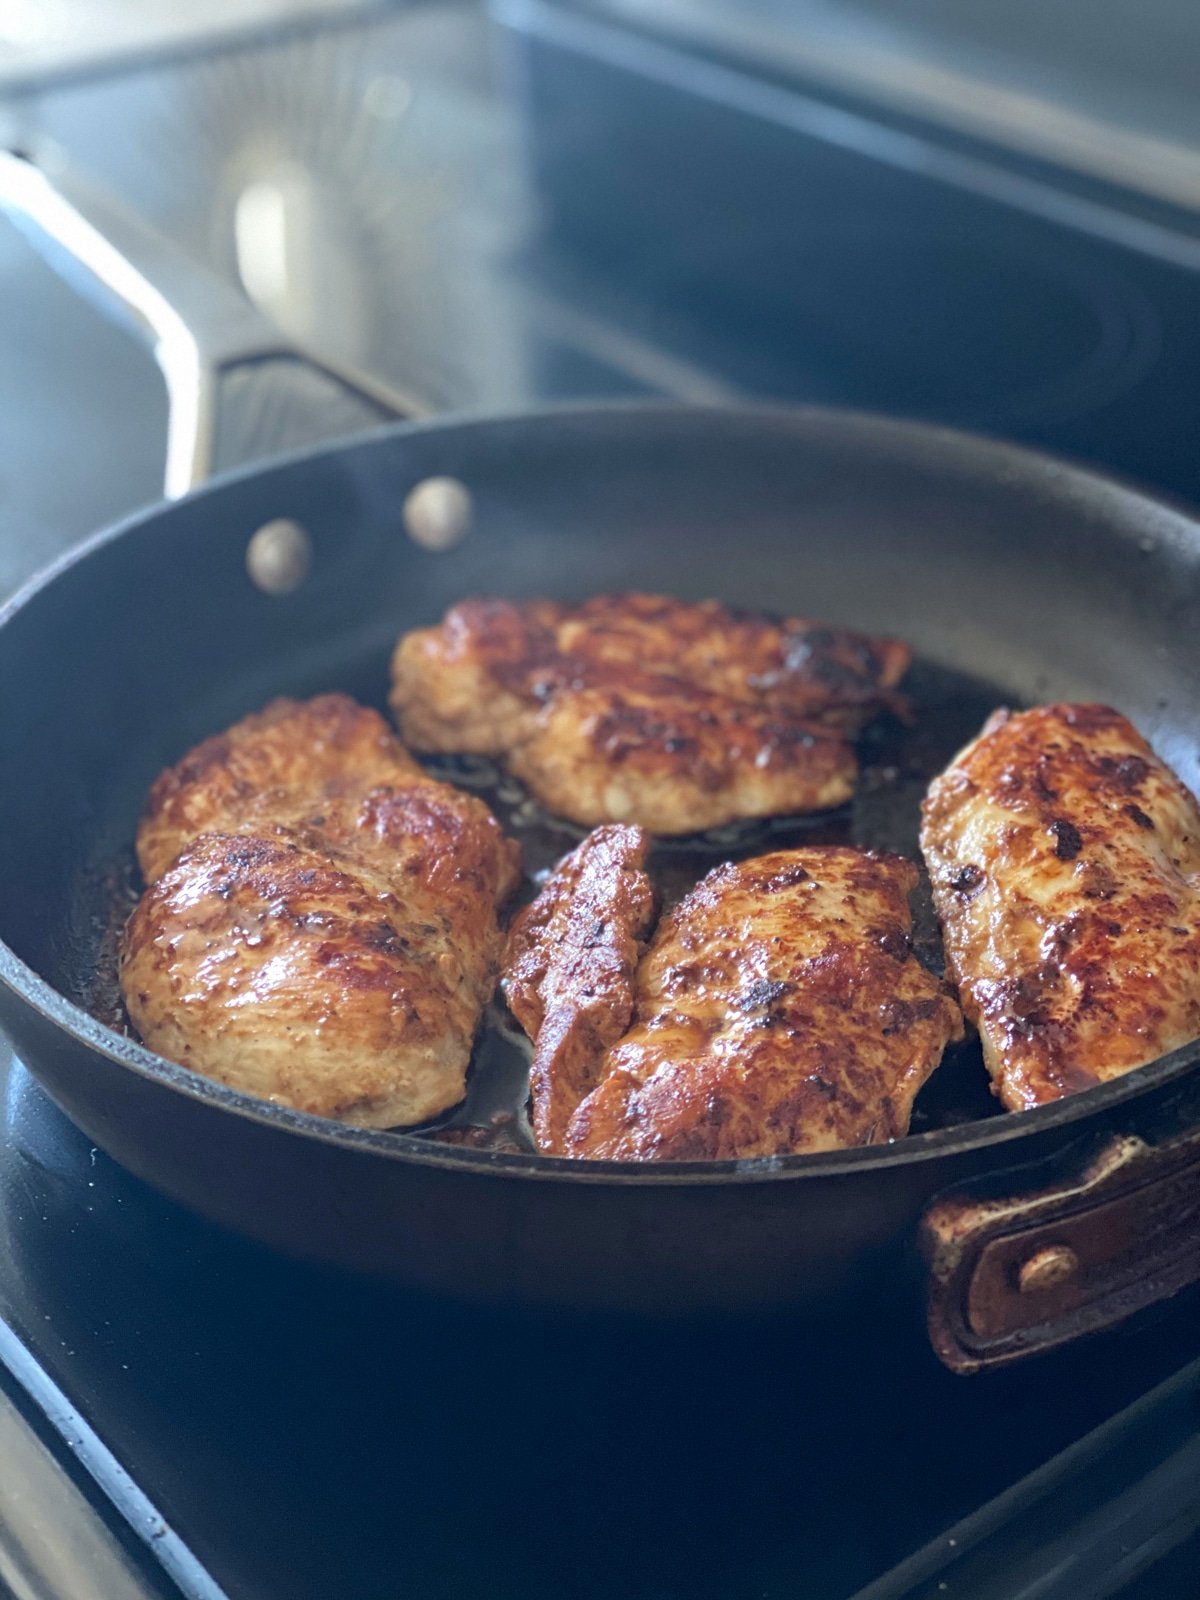 Oven Baking Chicken Breasts In Balsamic Dressing